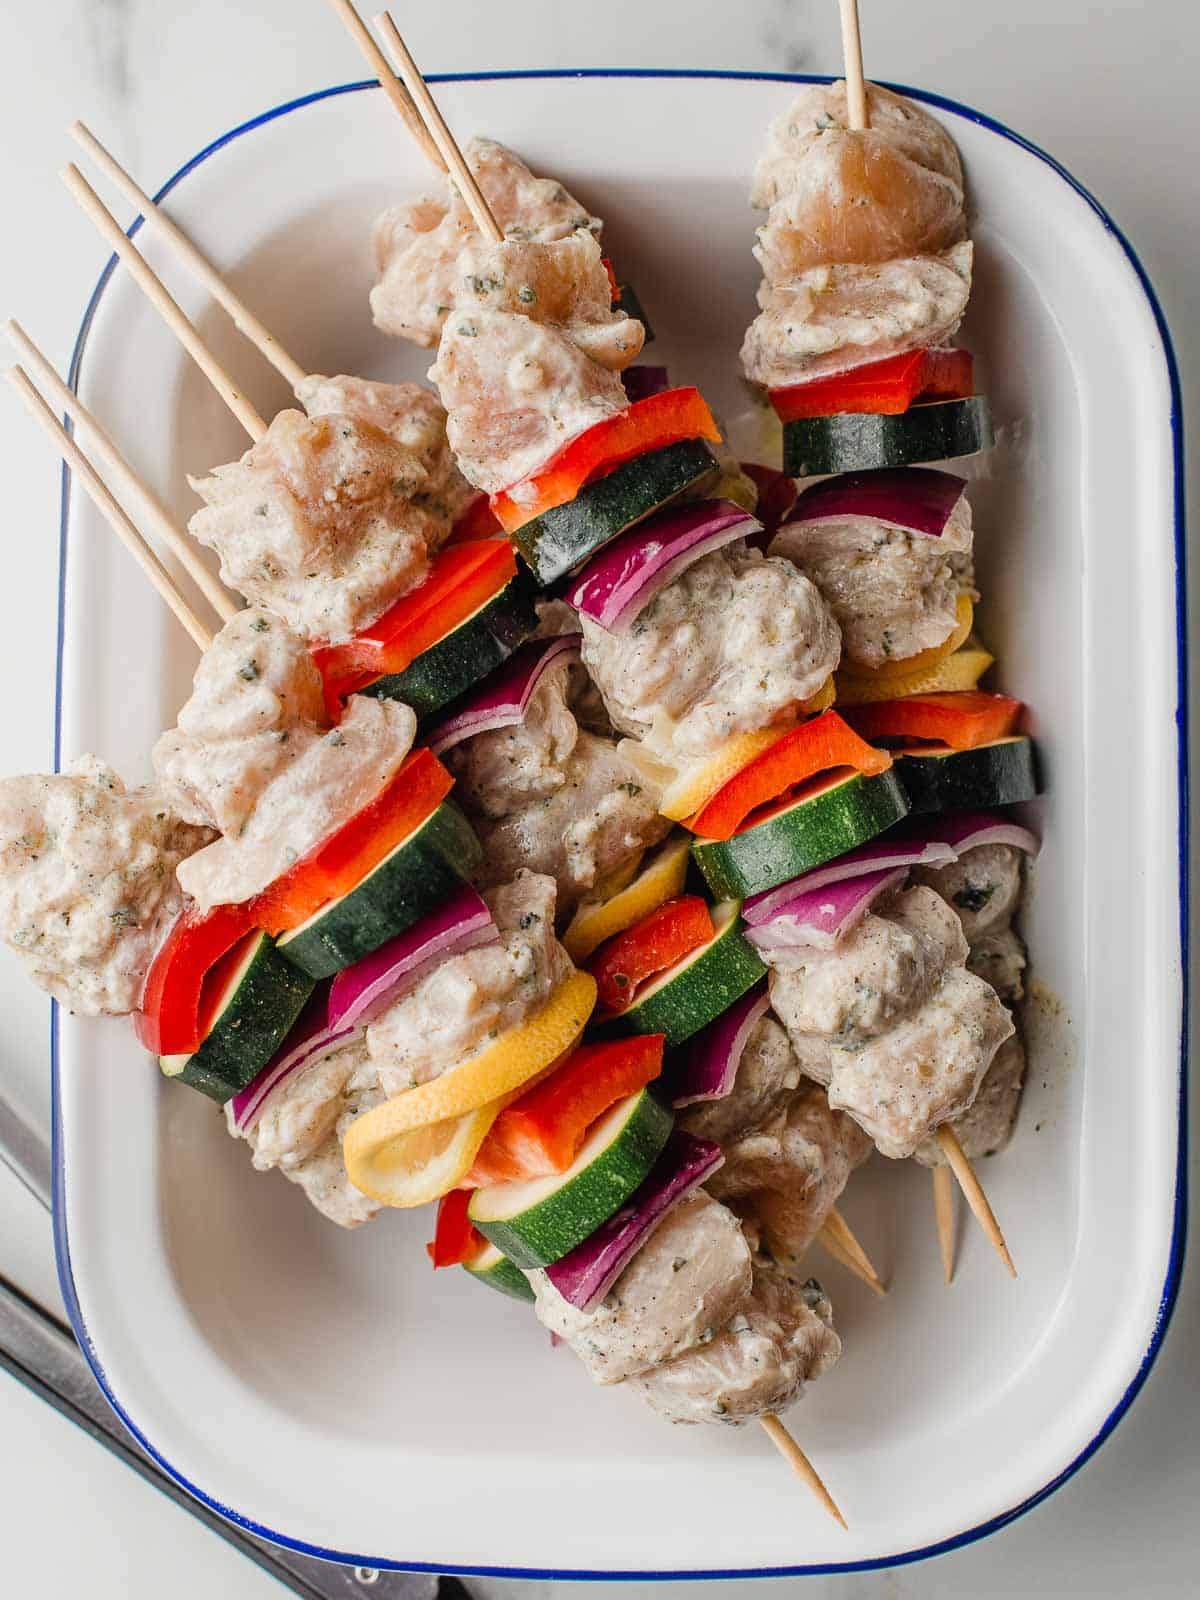 Raw chicken and vegetables on wooden skewers.